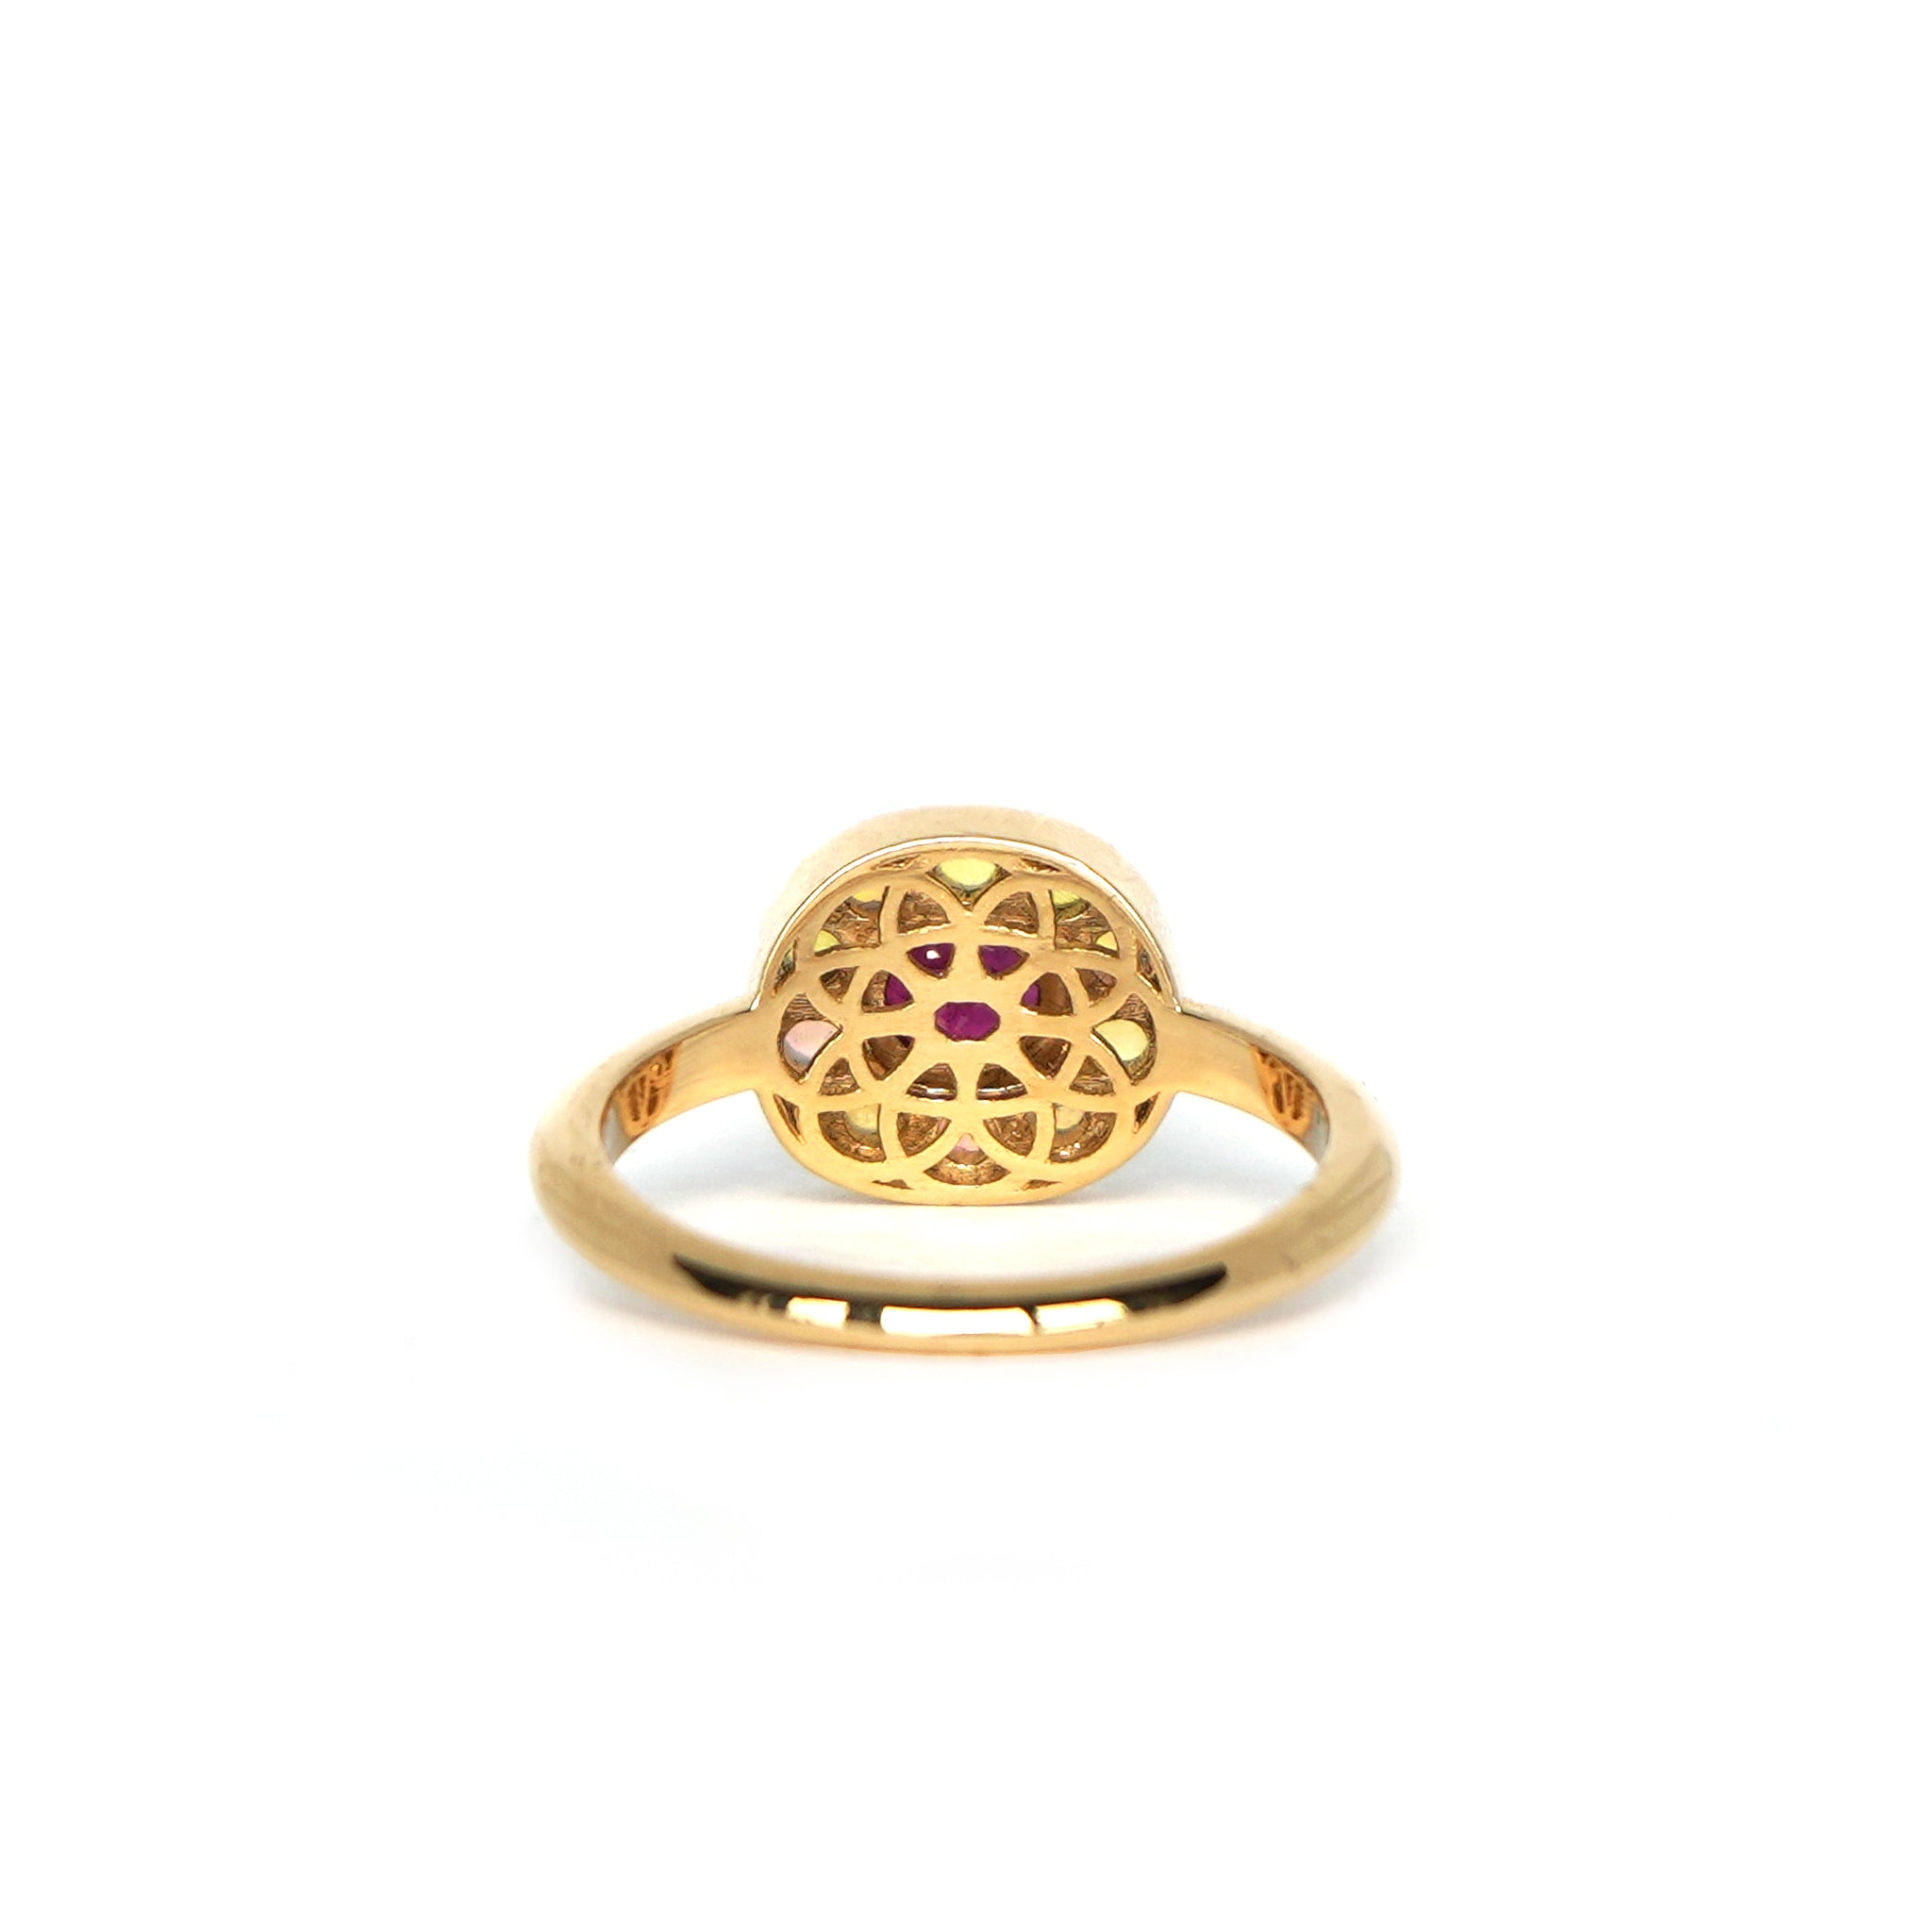 Back view of the one-of-a-kind Ruby halo ring with mini Australian opals, retro-antique inspired design by Lico Jewelry, set in solid 14k yellow gold.